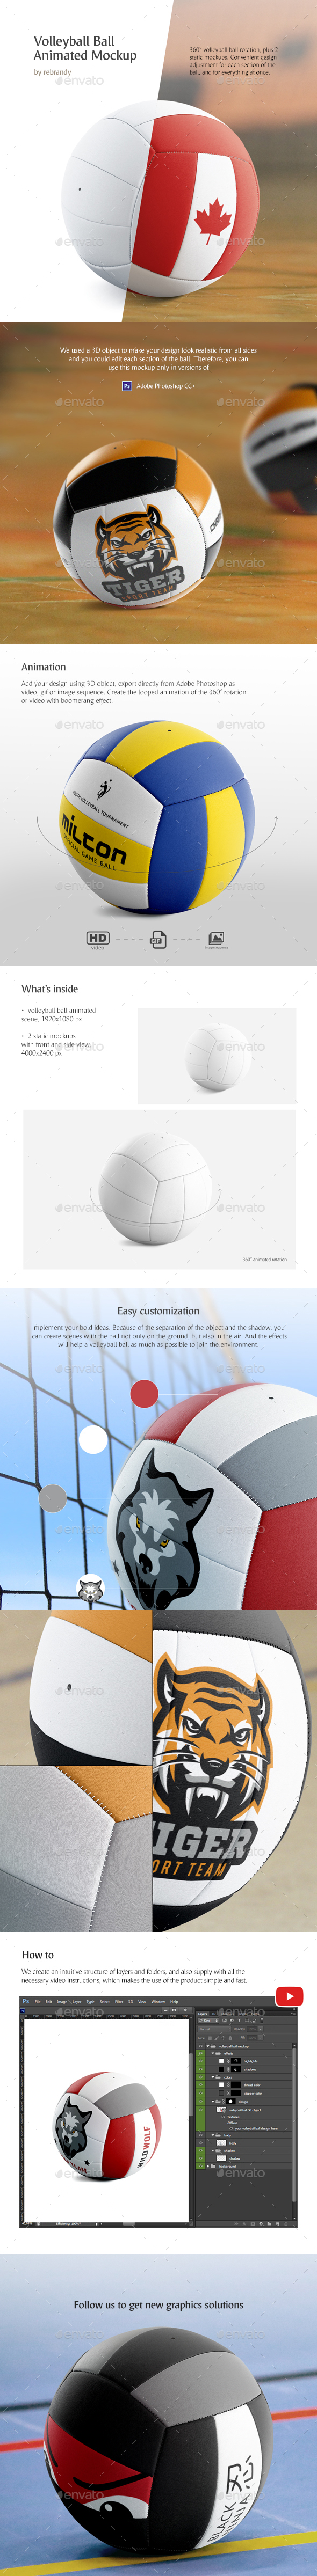 Download Volleyball Ball Animated Mockup Graphic Free Download ...